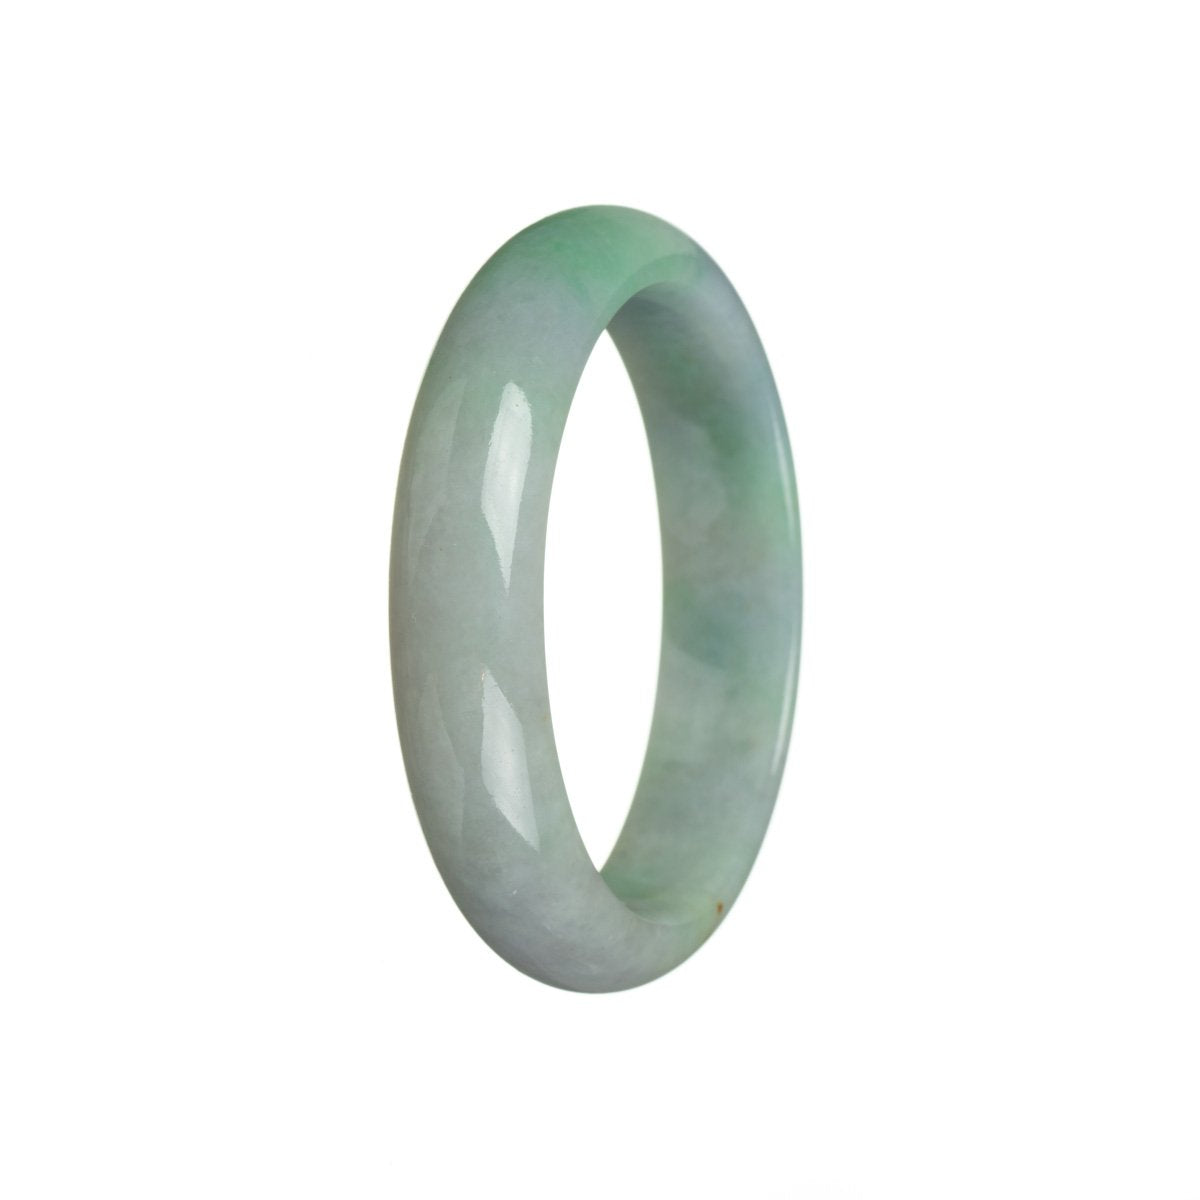 A half moon-shaped bracelet made of authentic natural green jadeite with lavender undertones. It measures 56mm in diameter and is a beautiful addition to any jewelry collection.